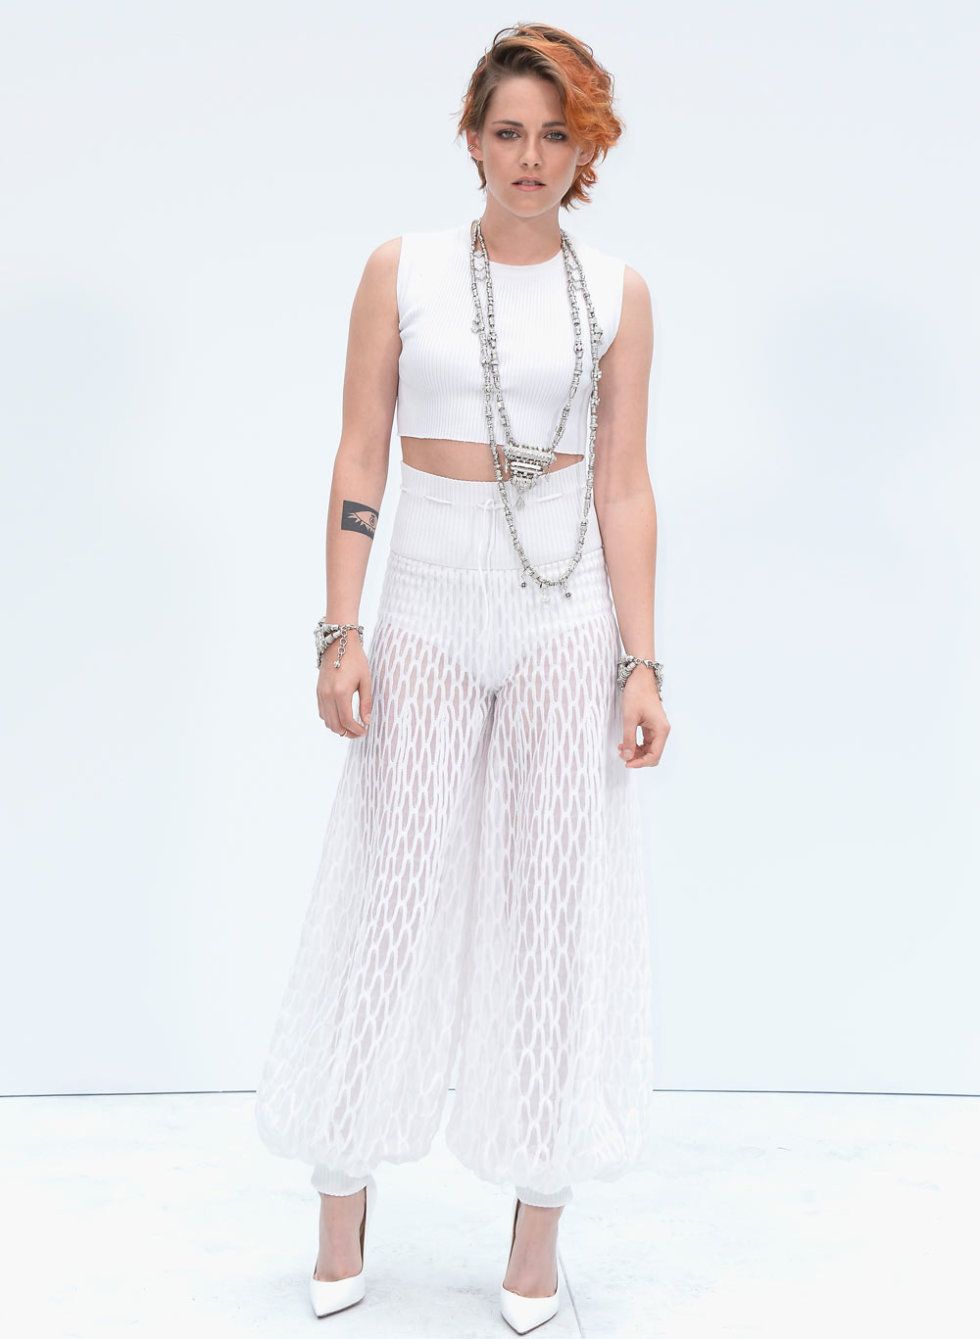 <p>Has Kristen ever looked this cool before? No. Never. Ever.</p>
<p>The Twilight actress not only debuted a brand new crop, but also showed off her fashion prowess in an all-white Chanel ensemble.</p>
<p>K-Stew's ribbed white crop top and sheer trousers made her look every inch a star, with her quirky crop and Chanel jewellery completing the look.</p>
<p><a href="http://www.cosmopolitan.co.uk/fashion/celebrity/celebrity-style-gallery">THIS WEEK'S BEST CELEBRITY STYLE</a></p>
<p><a href="http://www.cosmopolitan.co.uk/fashion/news/paris-fashion-week-versace" target="_blank">J.LO STUNS IN SILVER AT VERSACE</a></p>
<p><a href="http://www.cosmopolitan.co.uk/fashion/shopping/celebrity-weddings-1" target="_blank">AMAZING ALTERNATIVE CELEBRITY BRIDAL LOOKS</a></p>